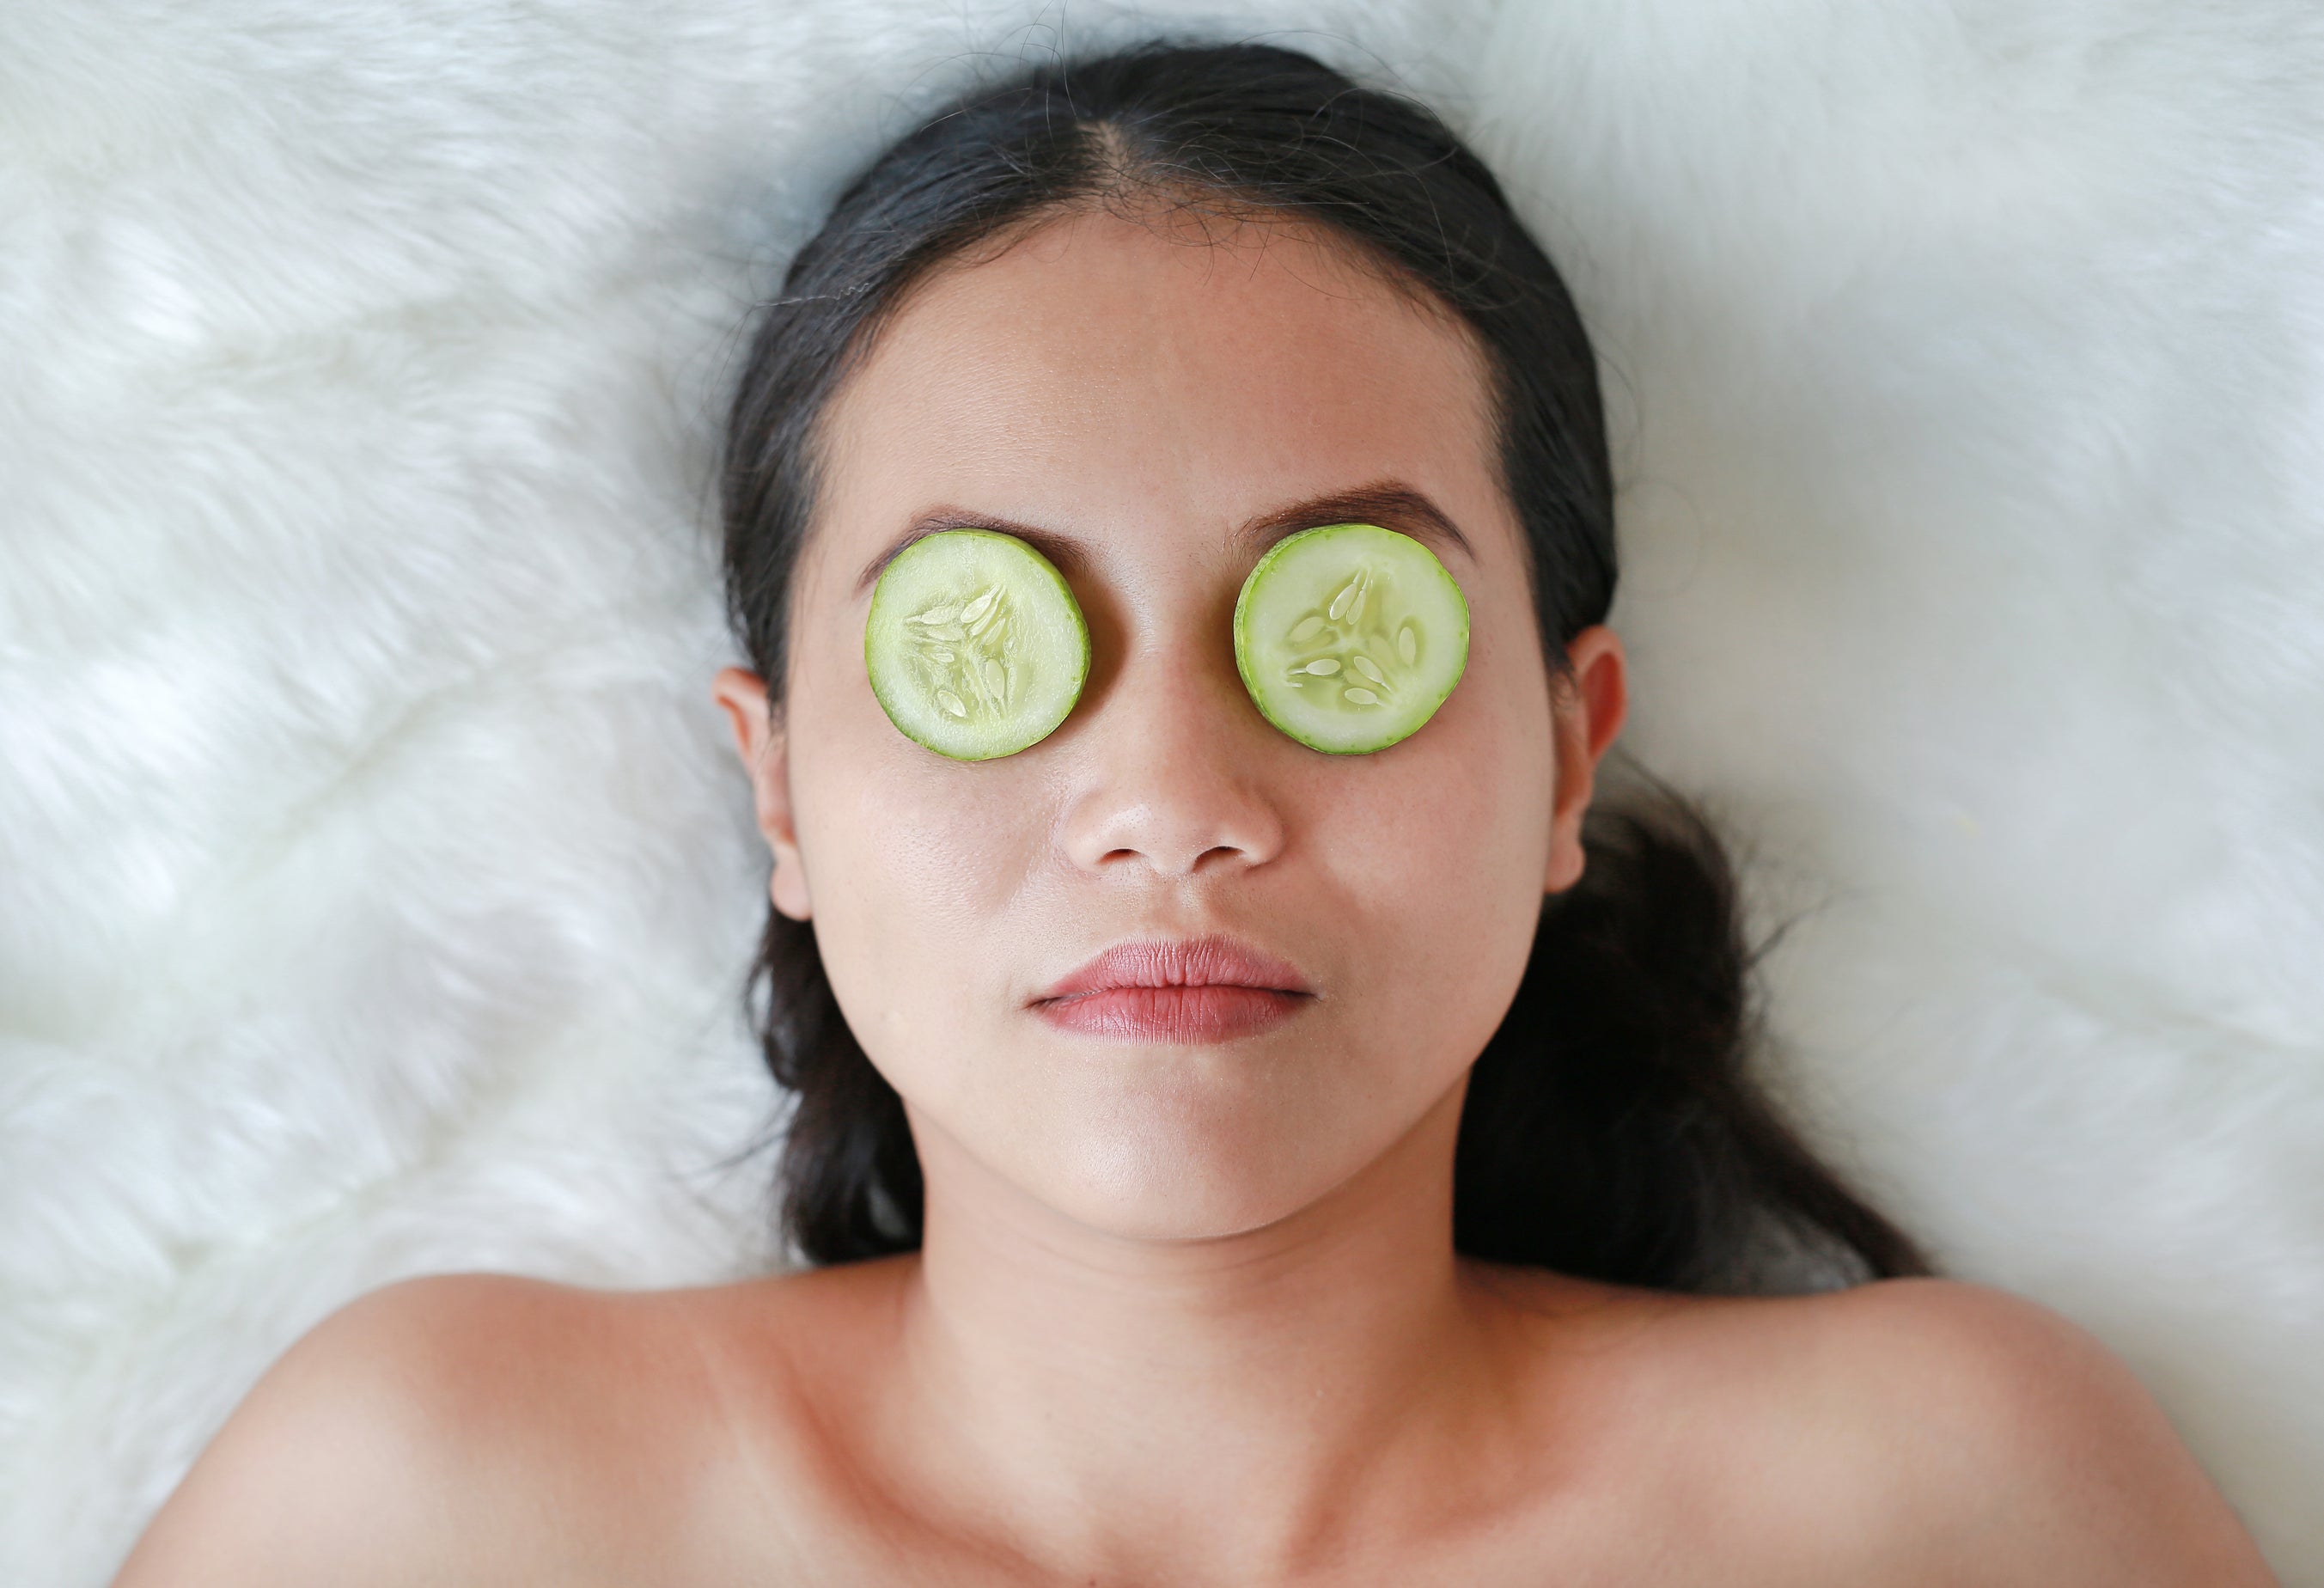 A pregnant woman relaxes her eyes and nourishes her undereye region by applying cool cucumber slices 